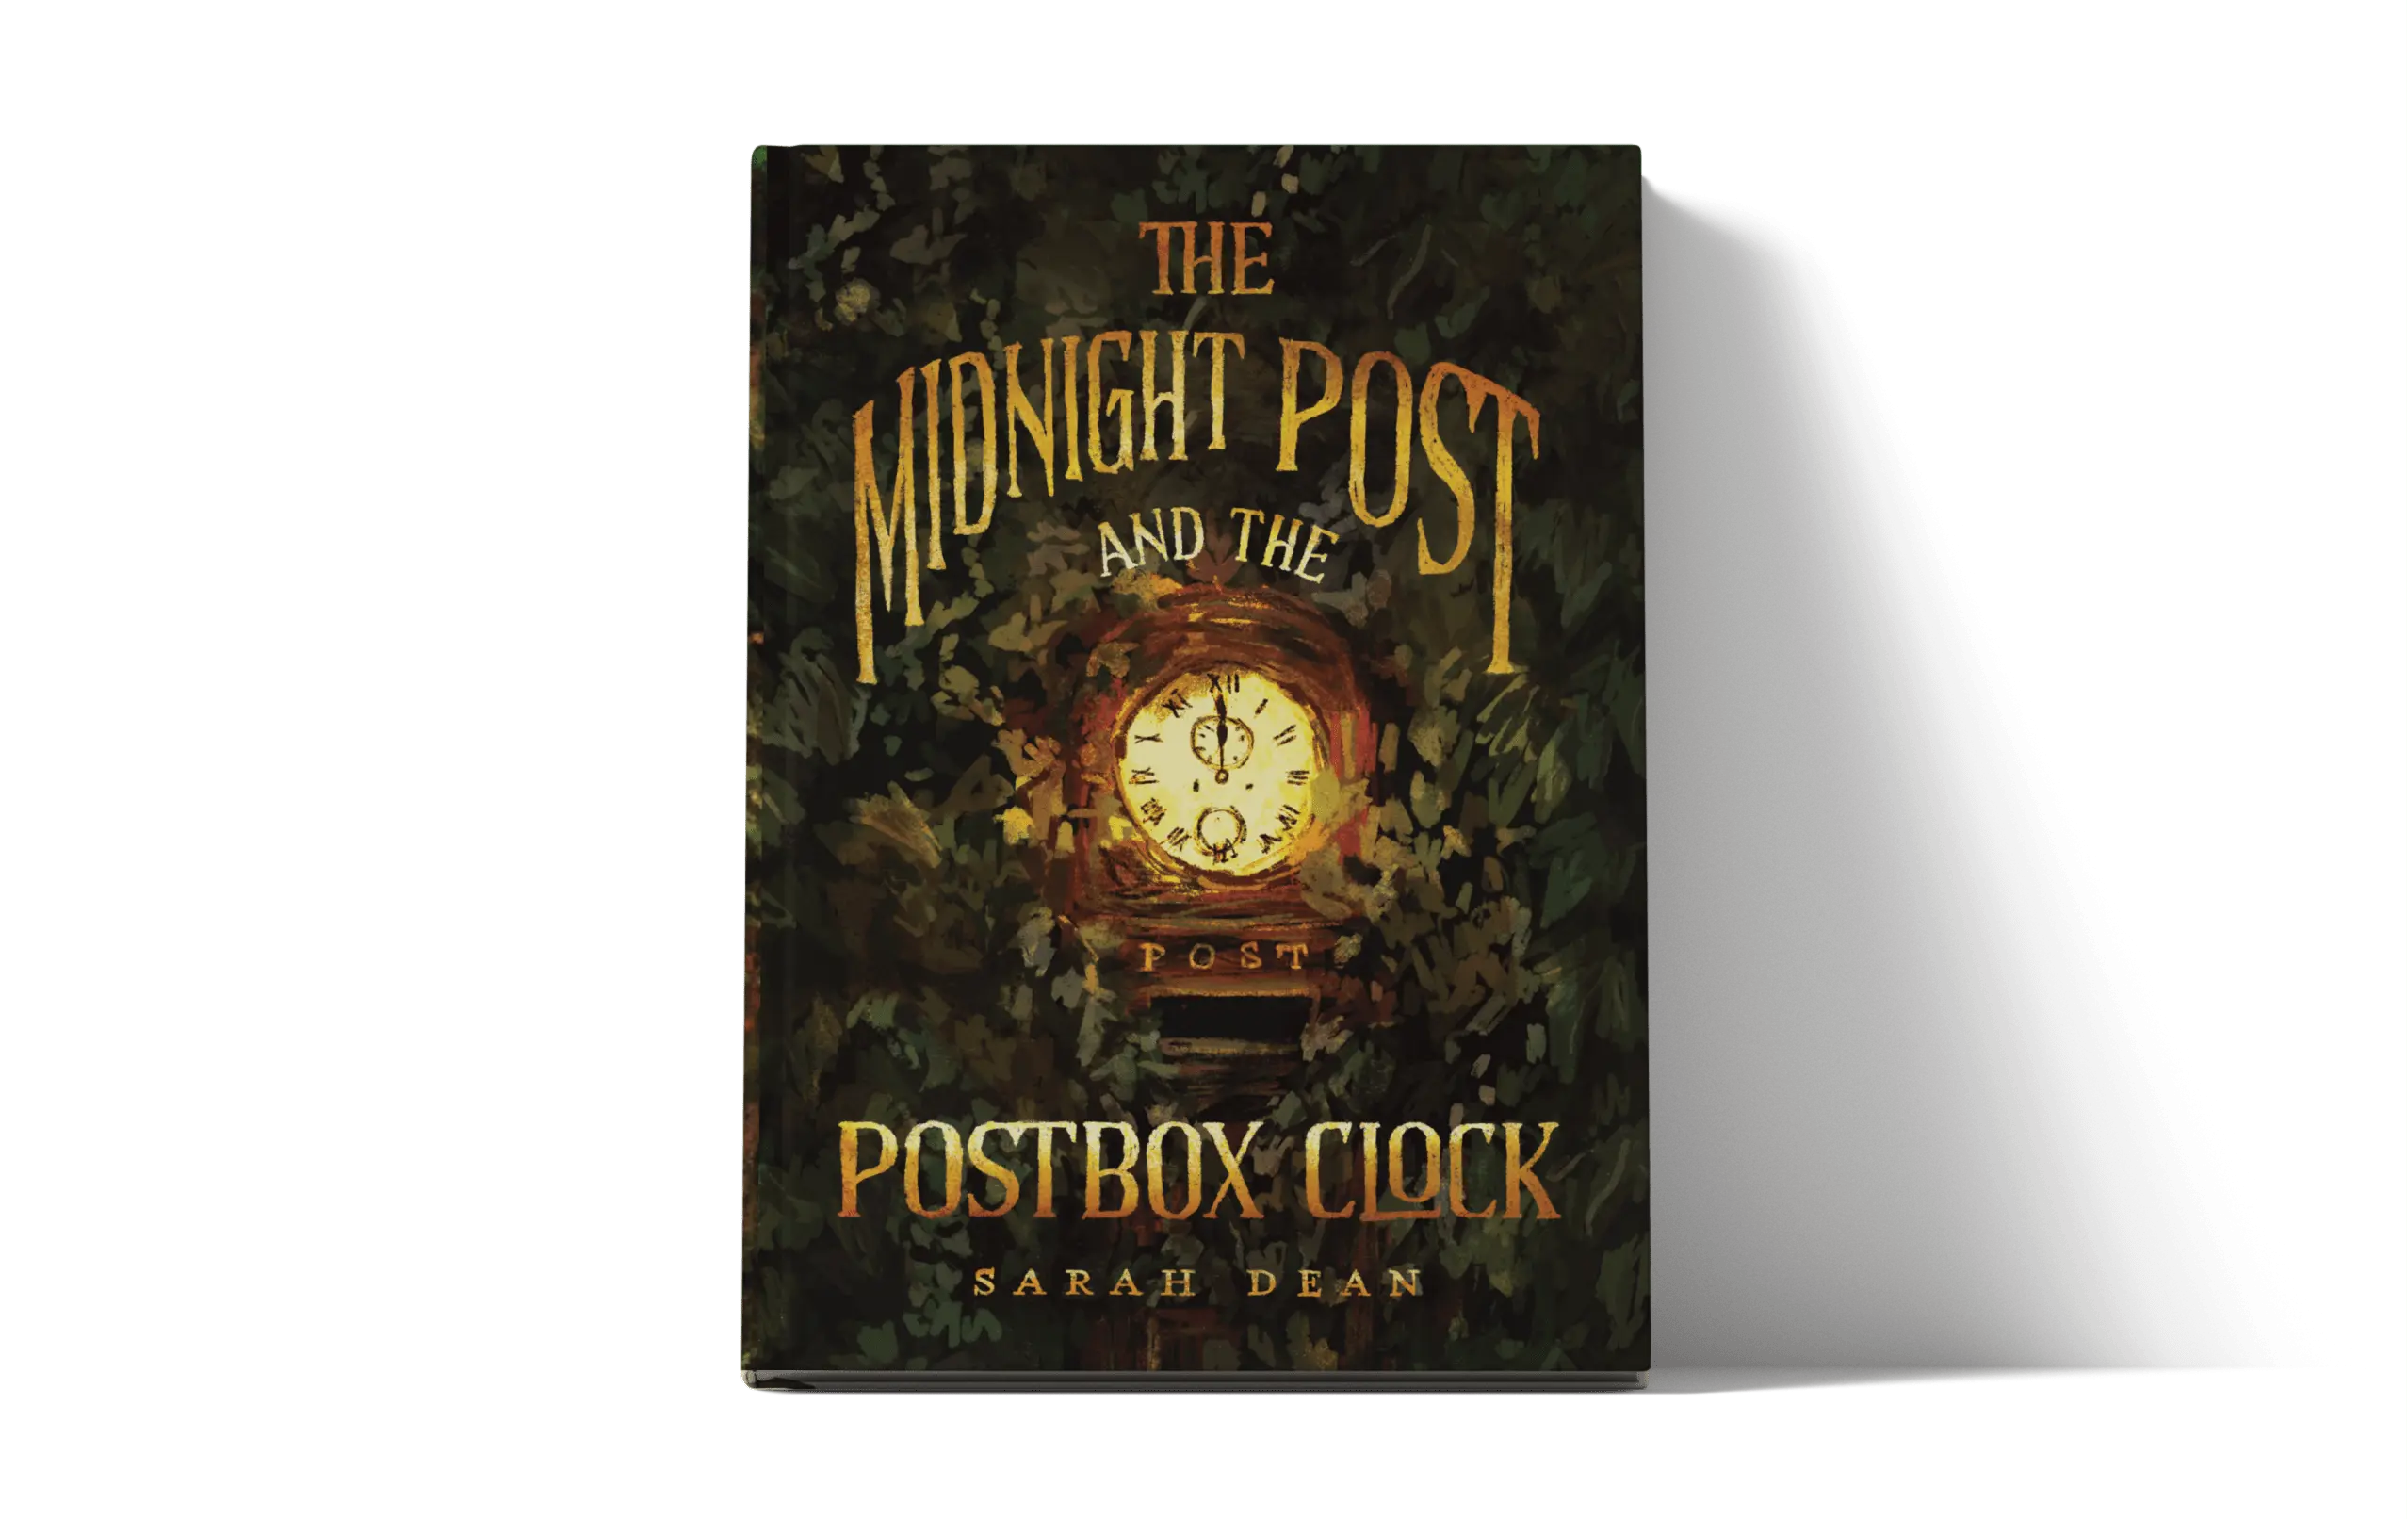 The Midnight Post book